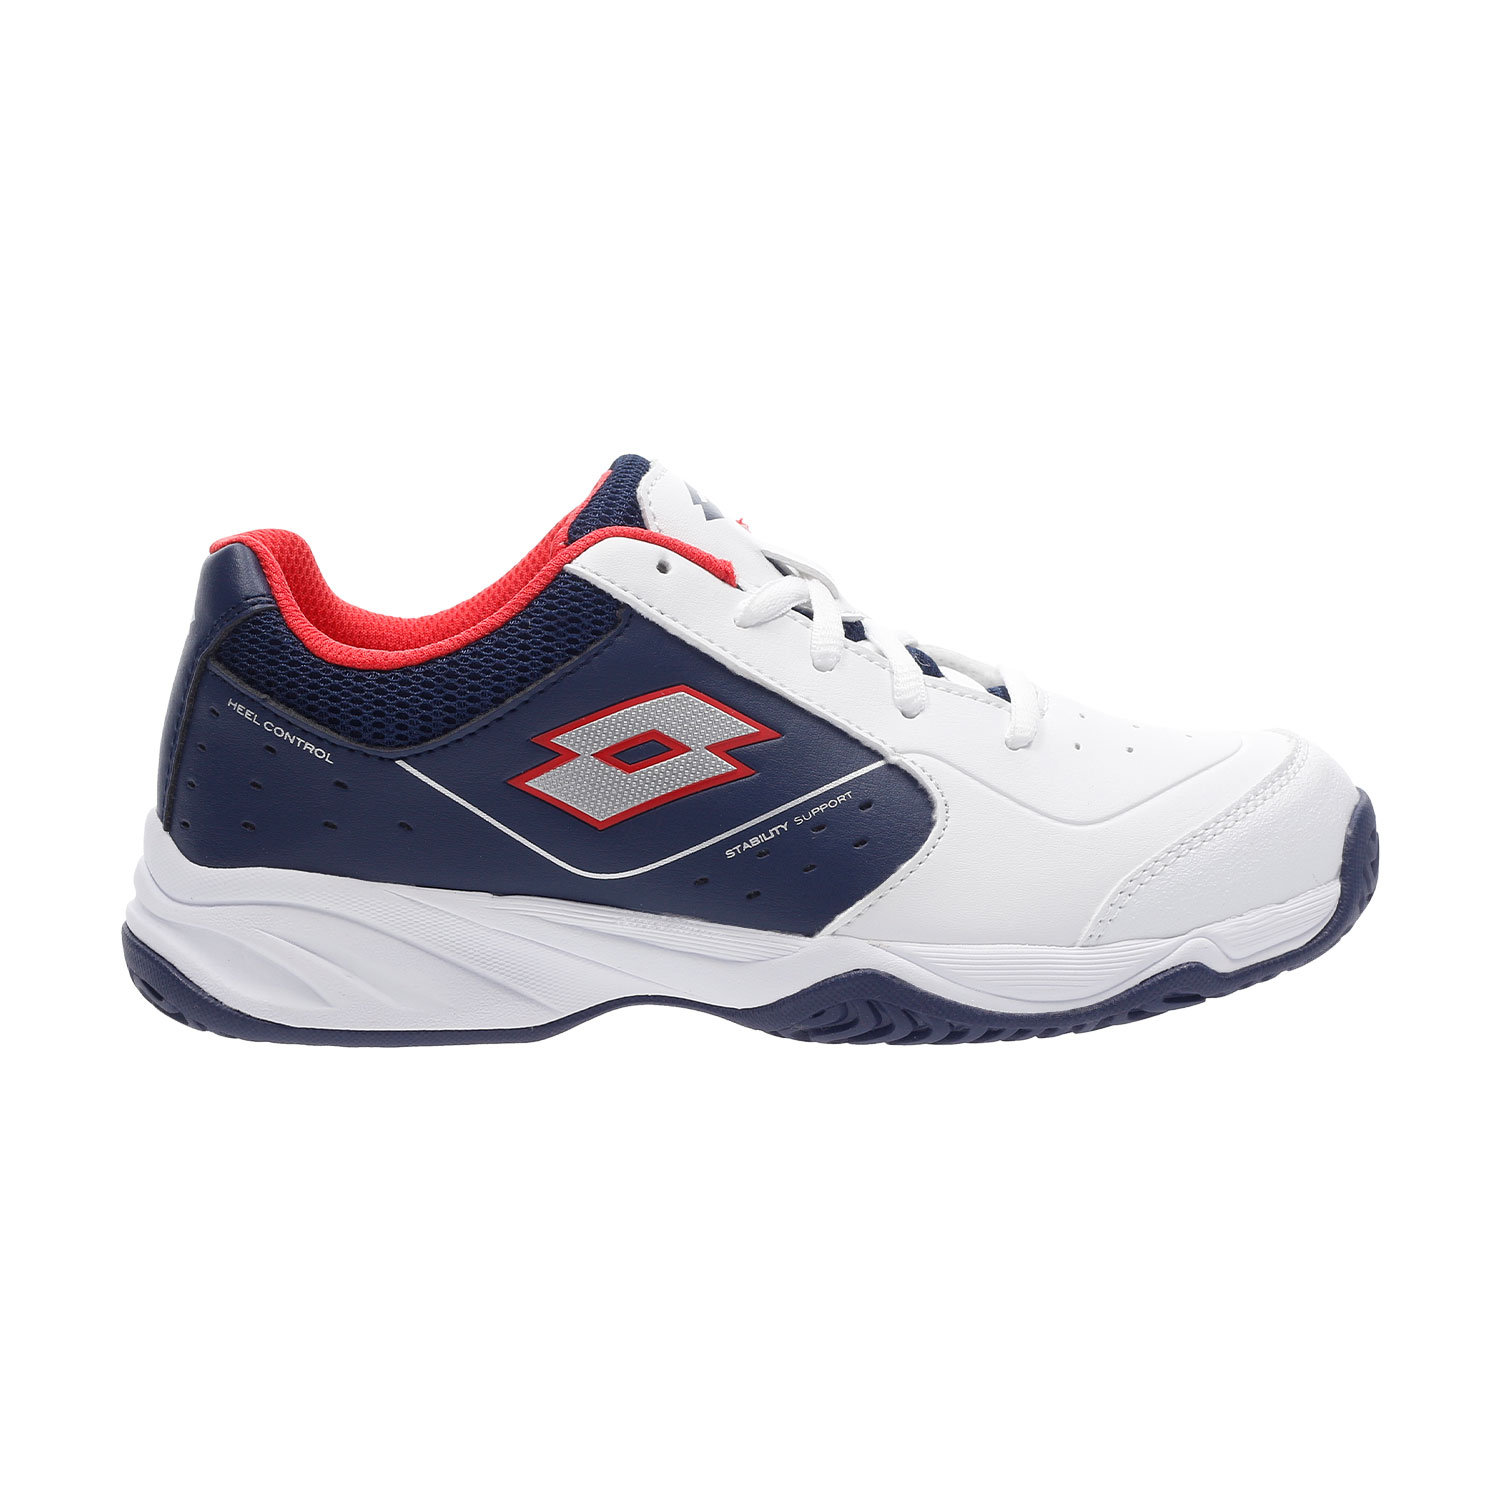 navy blue and white tennis shoes